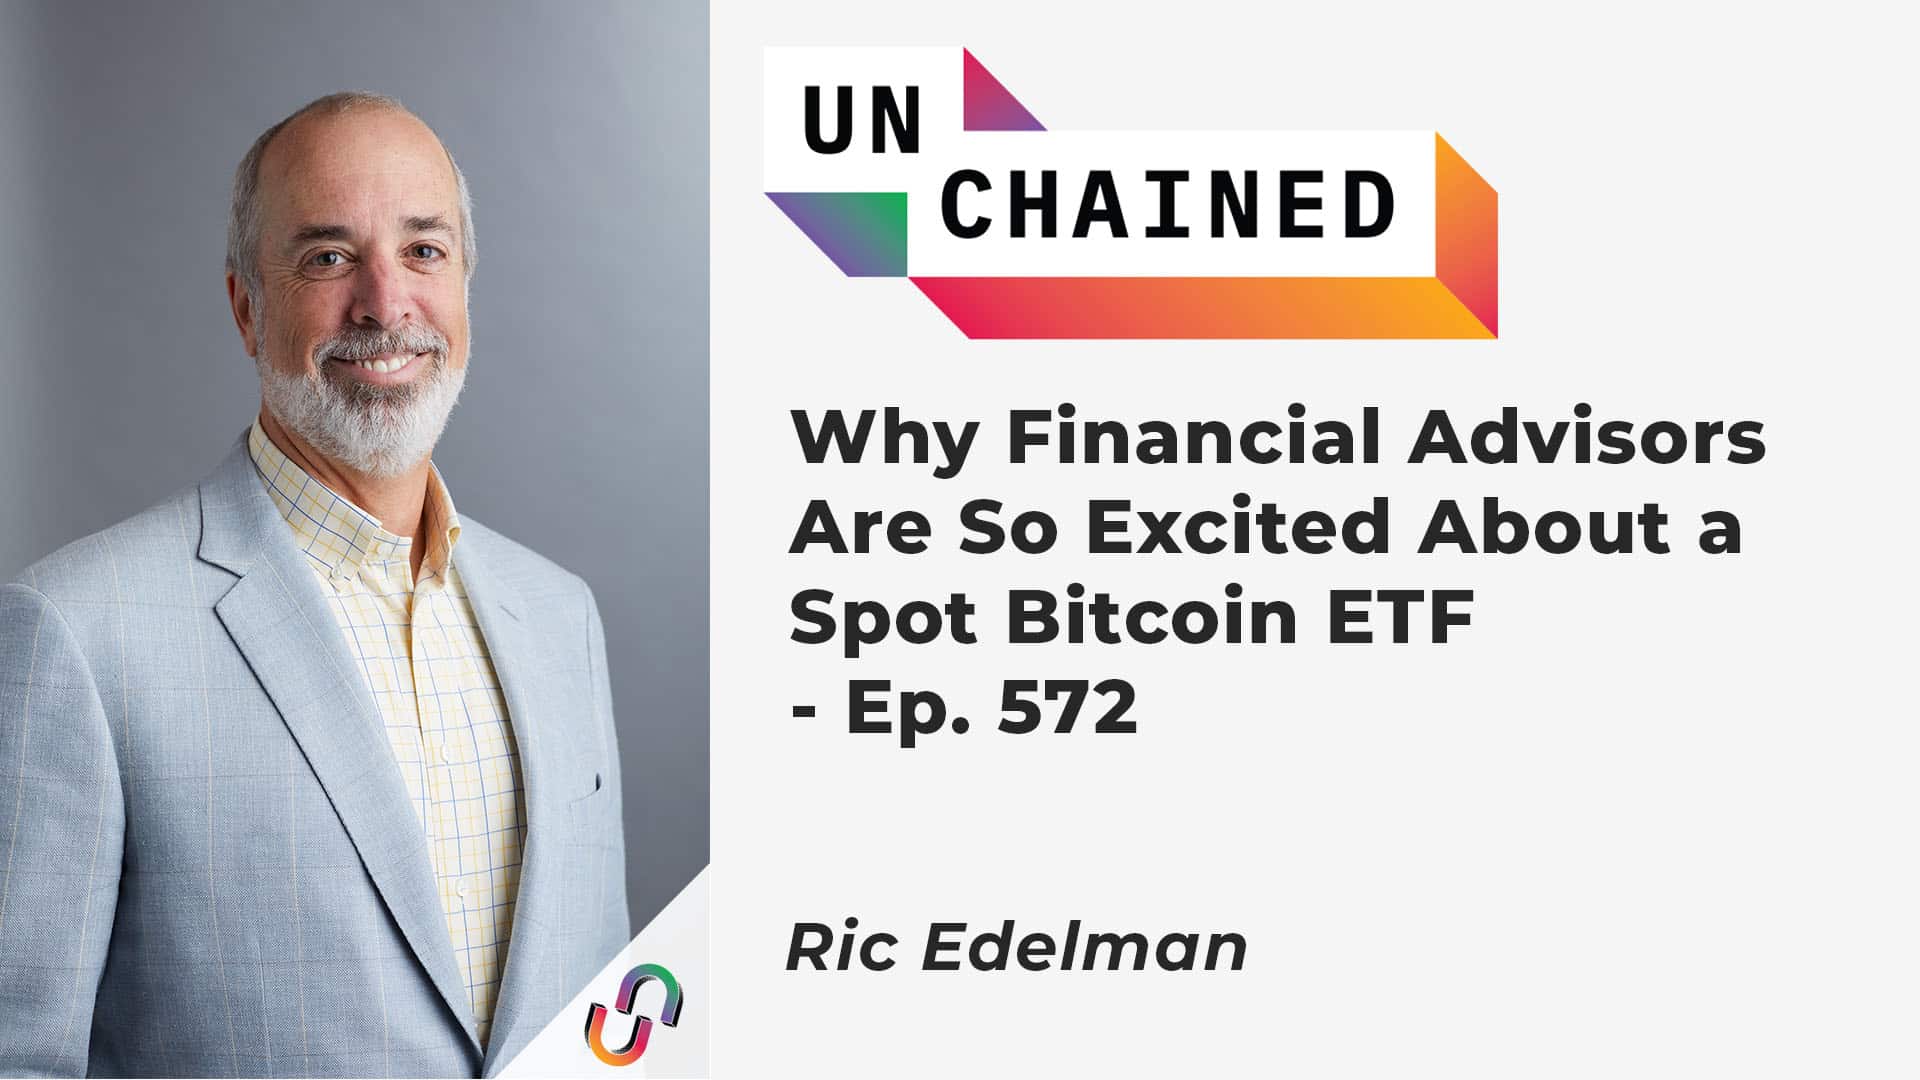 Why Financial Advisors Are So Excited About a Spot Bitcoin ETF - Ep. 572